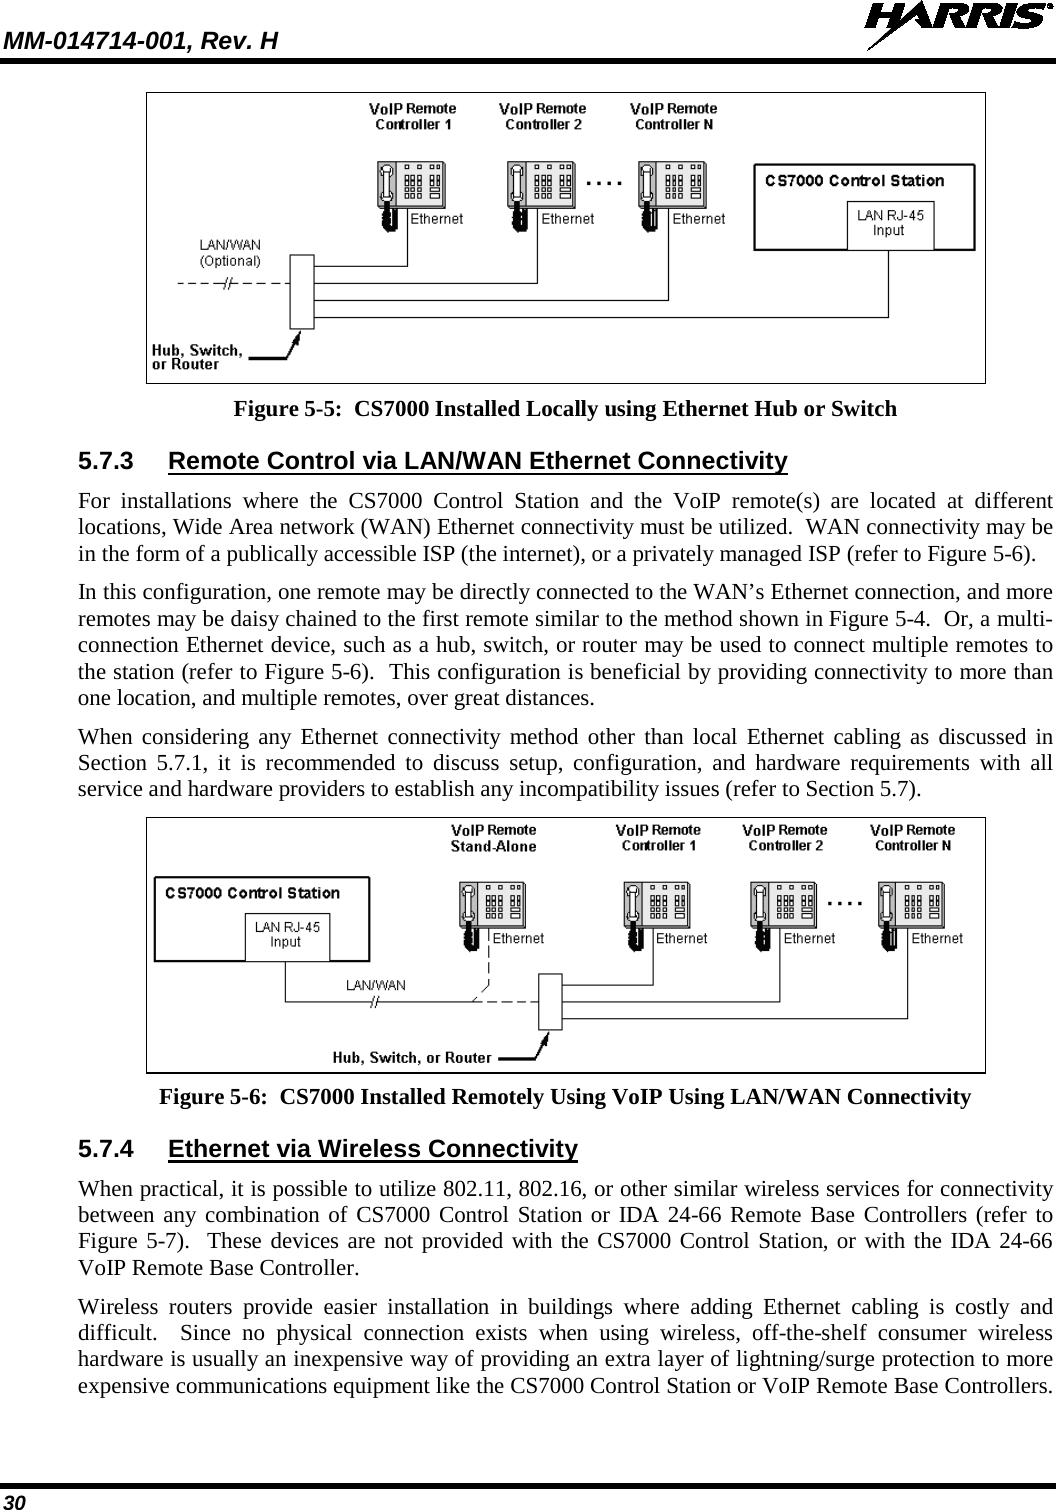 MM-014714-001, Rev. H   30  Figure 5-5:  CS7000 Installed Locally using Ethernet Hub or Switch 5.7.3 Remote Control via LAN/WAN Ethernet Connectivity For installations where the CS7000 Control Station and the VoIP remote(s) are located at different locations, Wide Area network (WAN) Ethernet connectivity must be utilized.  WAN connectivity may be in the form of a publically accessible ISP (the internet), or a privately managed ISP (refer to Figure 5-6).   In this configuration, one remote may be directly connected to the WAN’s Ethernet connection, and more remotes may be daisy chained to the first remote similar to the method shown in Figure 5-4.  Or, a multi-connection Ethernet device, such as a hub, switch, or router may be used to connect multiple remotes to the station (refer to Figure 5-6).  This configuration is beneficial by providing connectivity to more than one location, and multiple remotes, over great distances. When considering any Ethernet connectivity method other than local Ethernet cabling as discussed in Section  5.7.1, it is recommended to discuss setup, configuration, and hardware requirements with all service and hardware providers to establish any incompatibility issues (refer to Section 5.7).  Figure 5-6:  CS7000 Installed Remotely Using VoIP Using LAN/WAN Connectivity 5.7.4 Ethernet via Wireless Connectivity When practical, it is possible to utilize 802.11, 802.16, or other similar wireless services for connectivity between any combination of CS7000 Control Station or IDA 24-66 Remote Base Controllers (refer to Figure 5-7).  These devices are not provided with the CS7000 Control Station, or with the IDA 24-66 VoIP Remote Base Controller. Wireless routers provide easier installation in buildings where adding Ethernet cabling is costly and difficult.  Since no physical connection exists when using wireless, off-the-shelf consumer wireless hardware is usually an inexpensive way of providing an extra layer of lightning/surge protection to more expensive communications equipment like the CS7000 Control Station or VoIP Remote Base Controllers. 